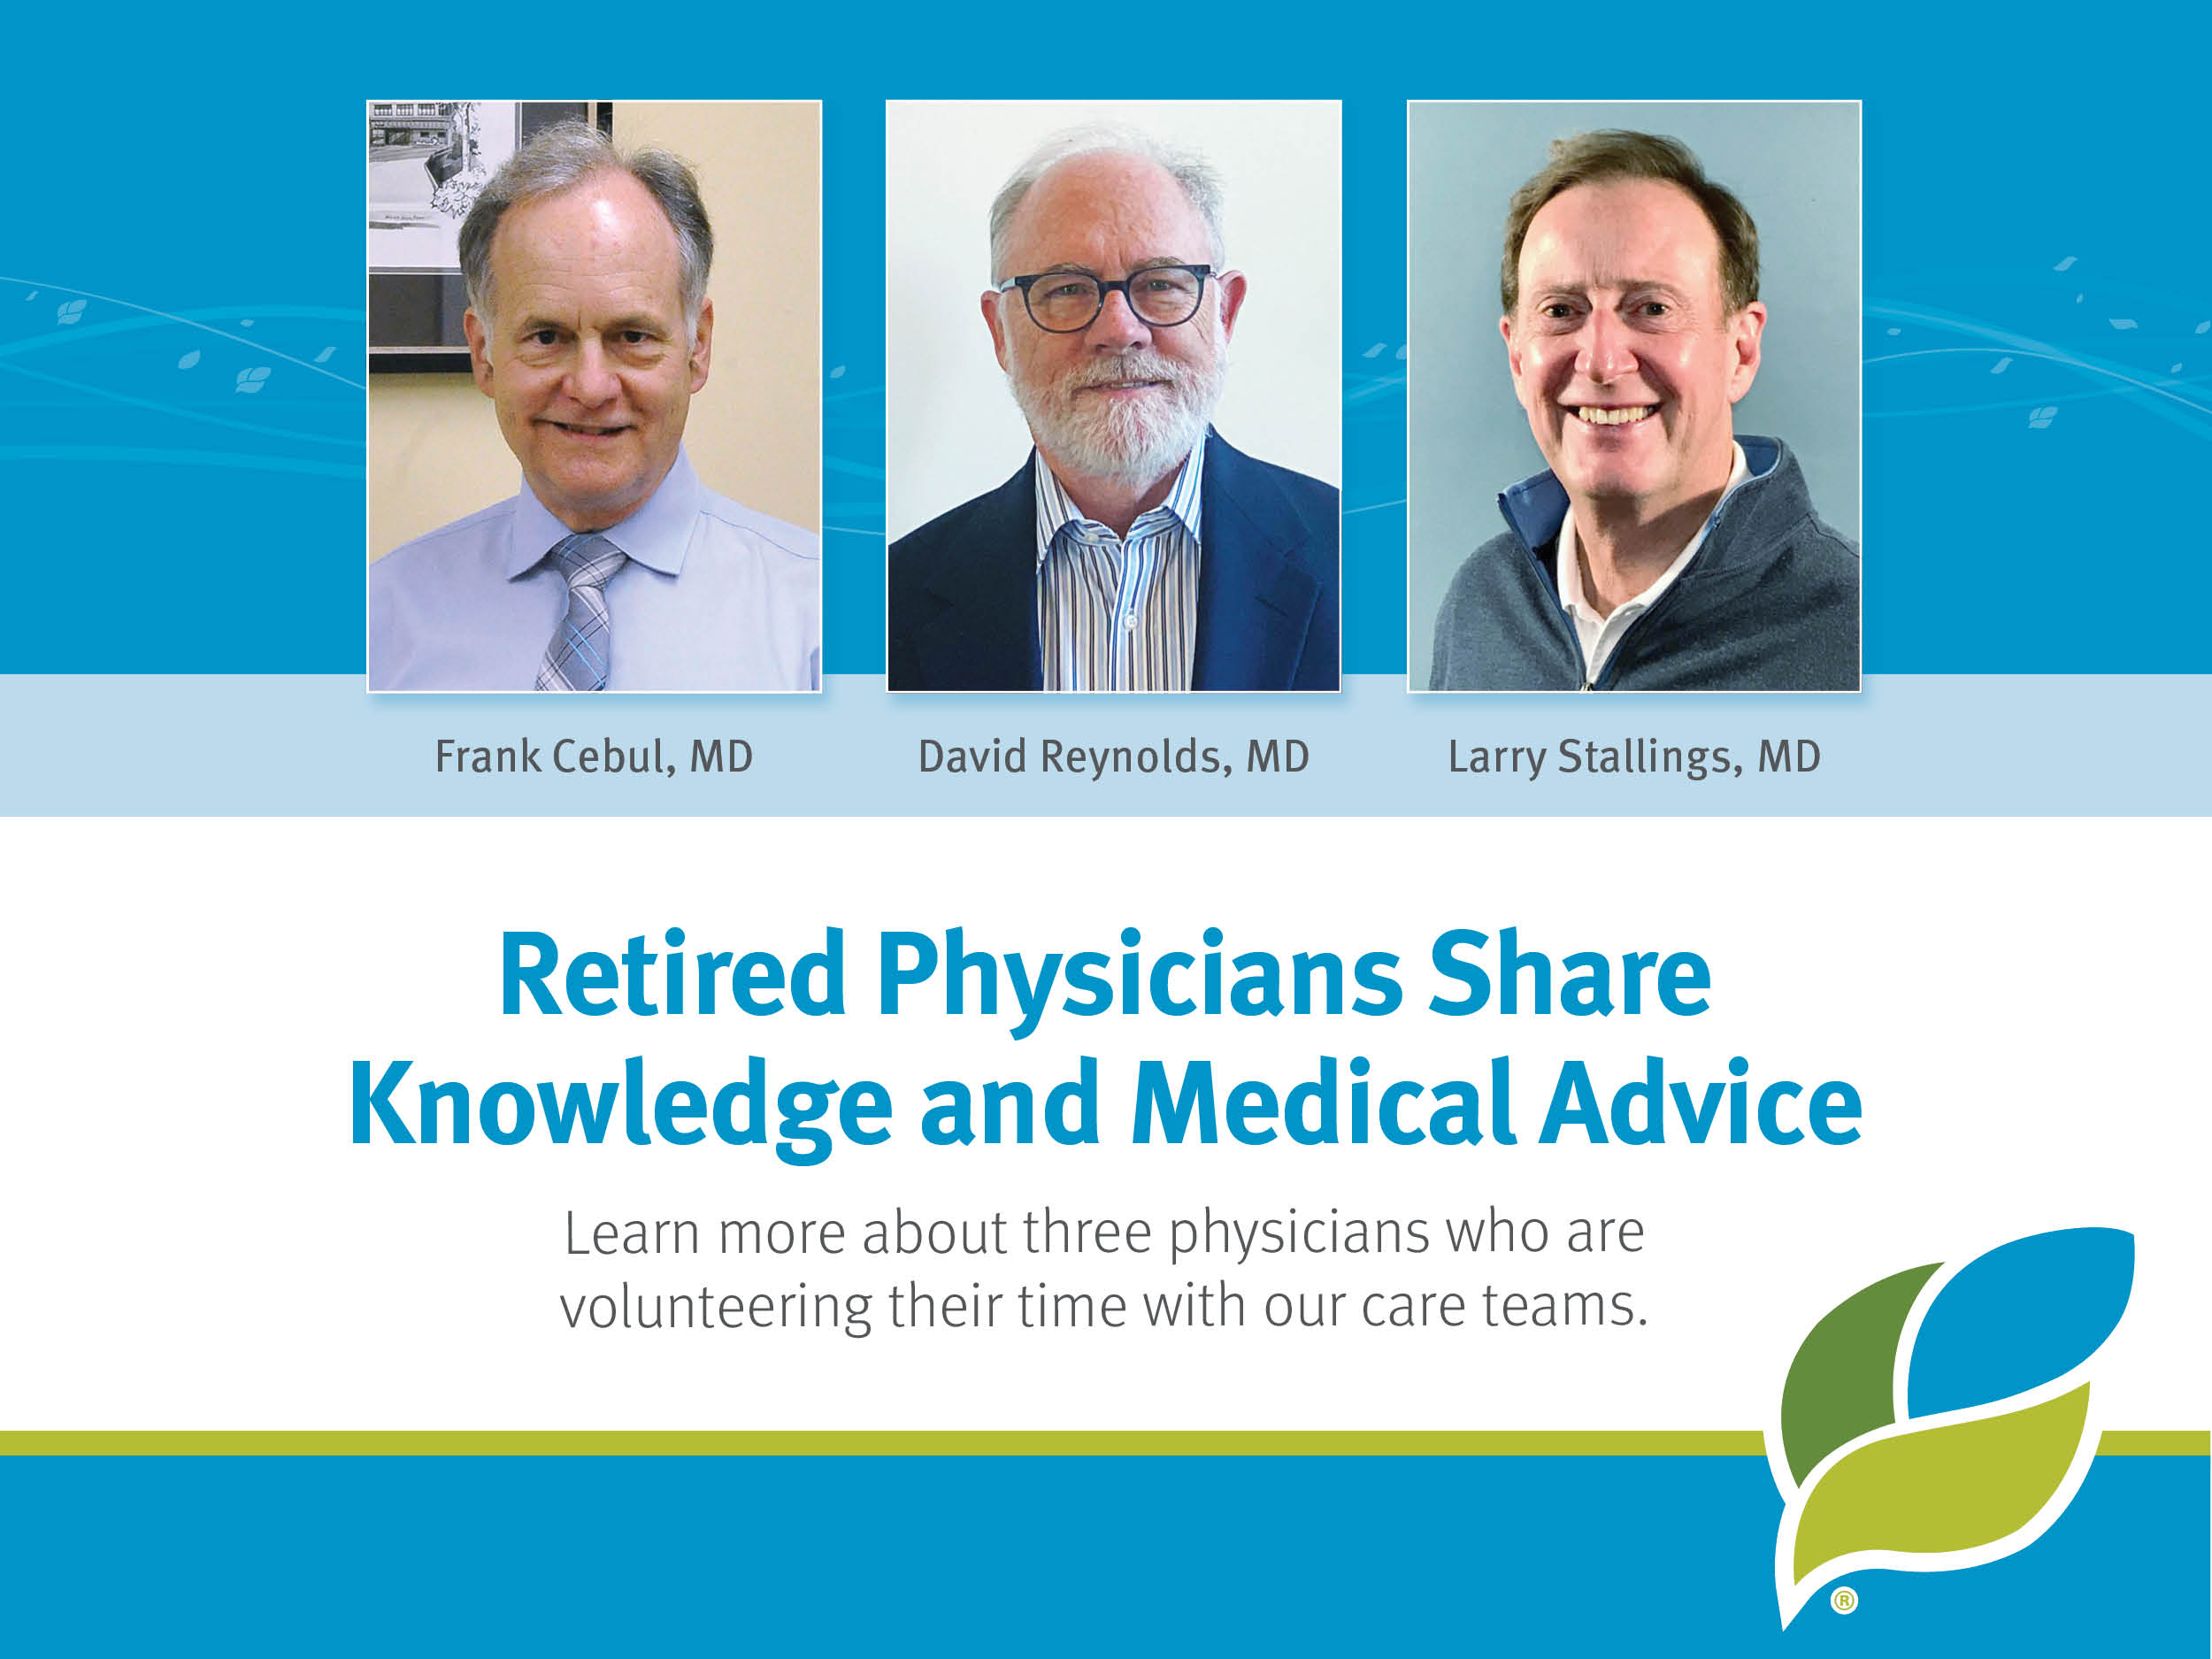 Retired physicians share knowledge and medical advice